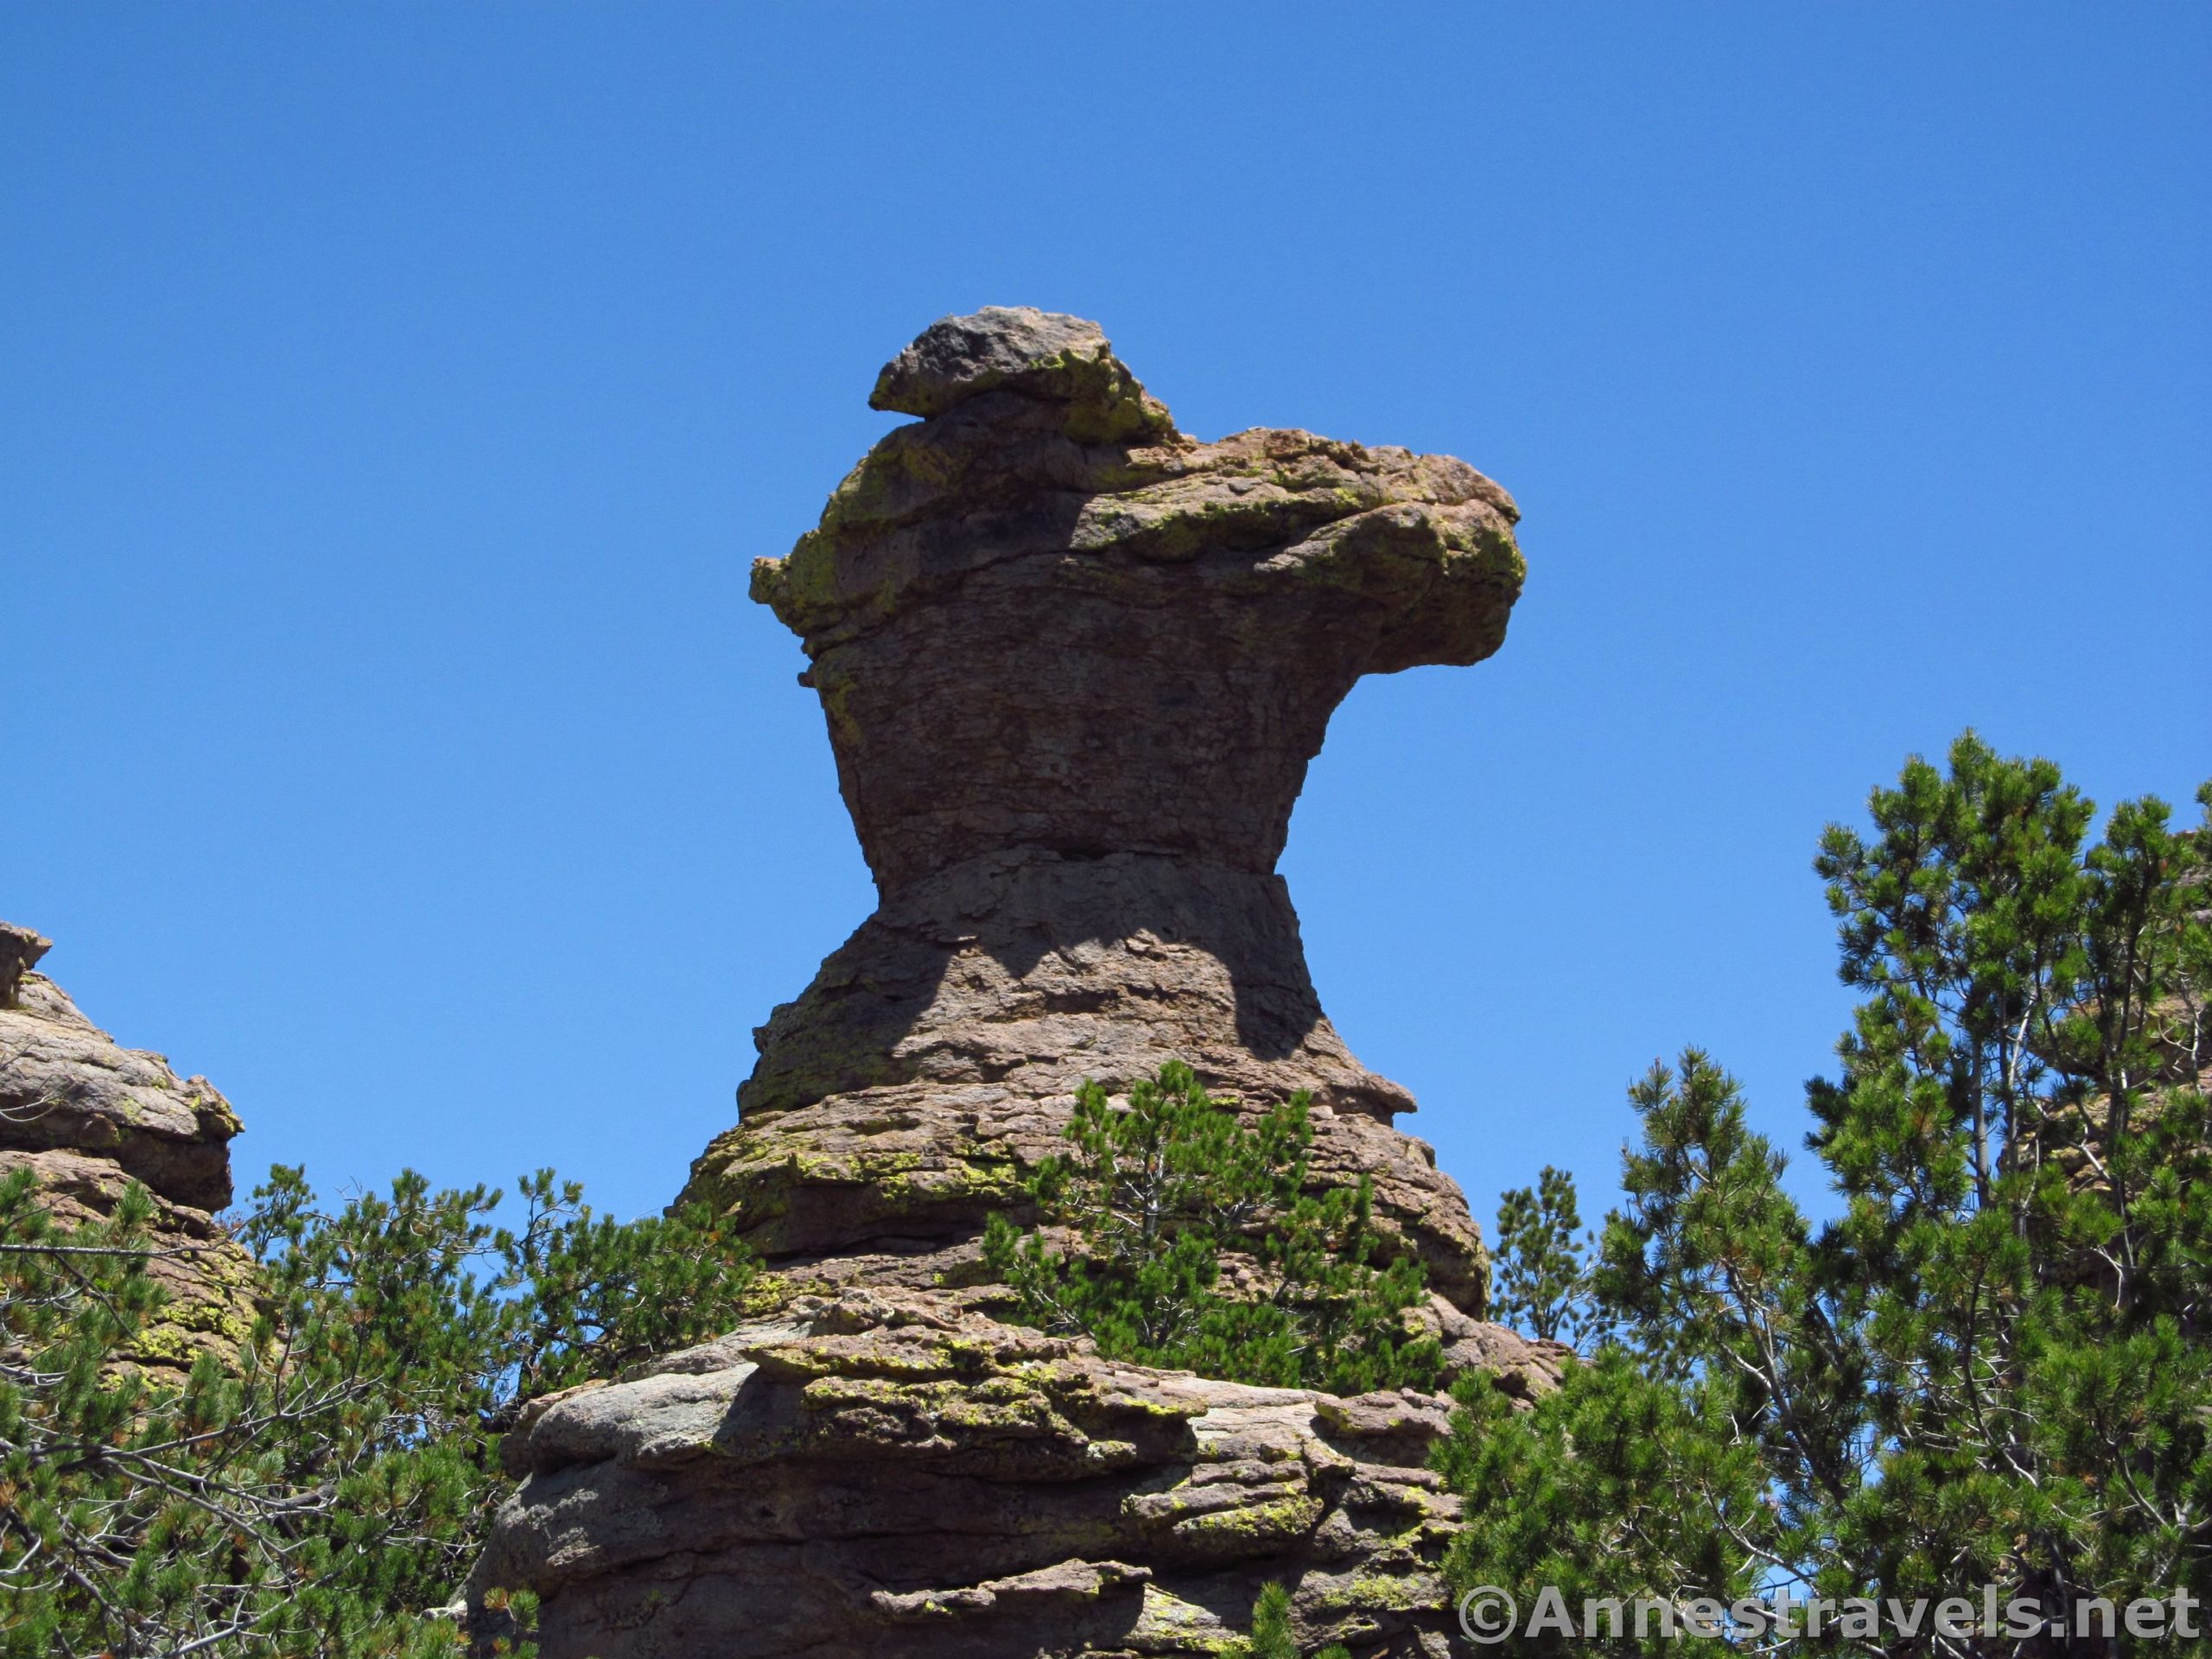 Chiricahua Formations: The Heart of Rocks